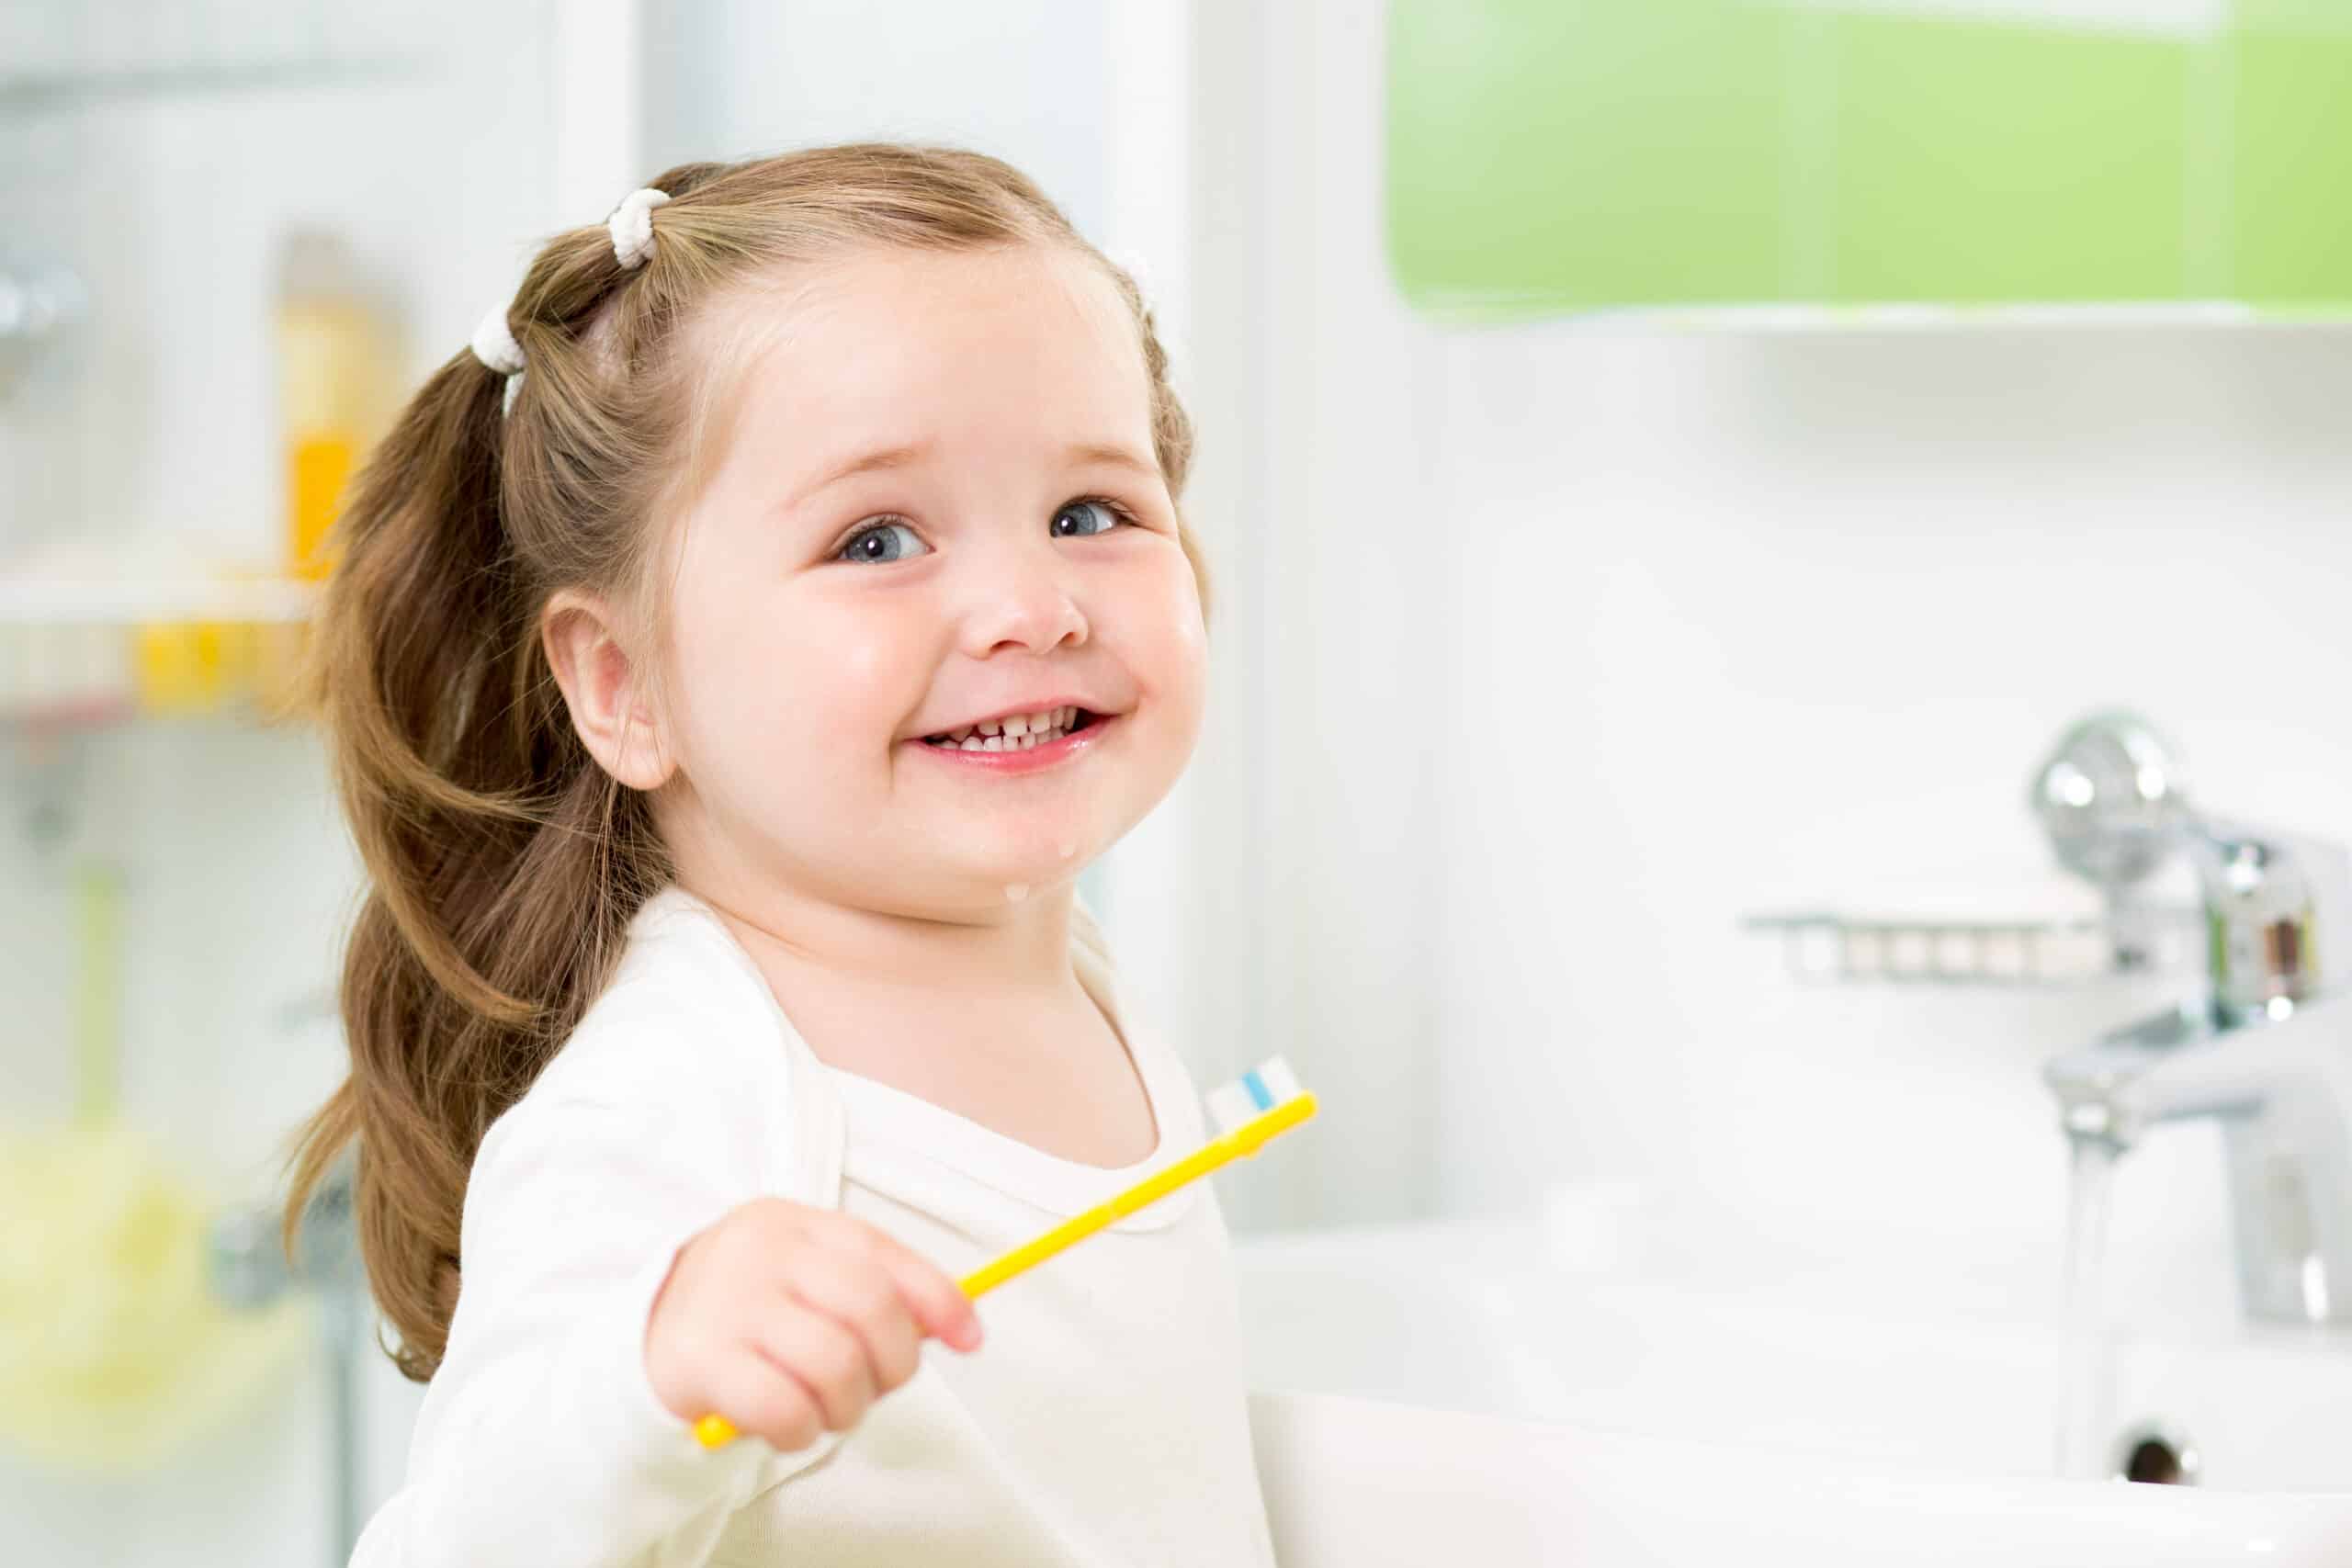 6 Important Tips For When Your Kids Begin Losing Baby Teeth